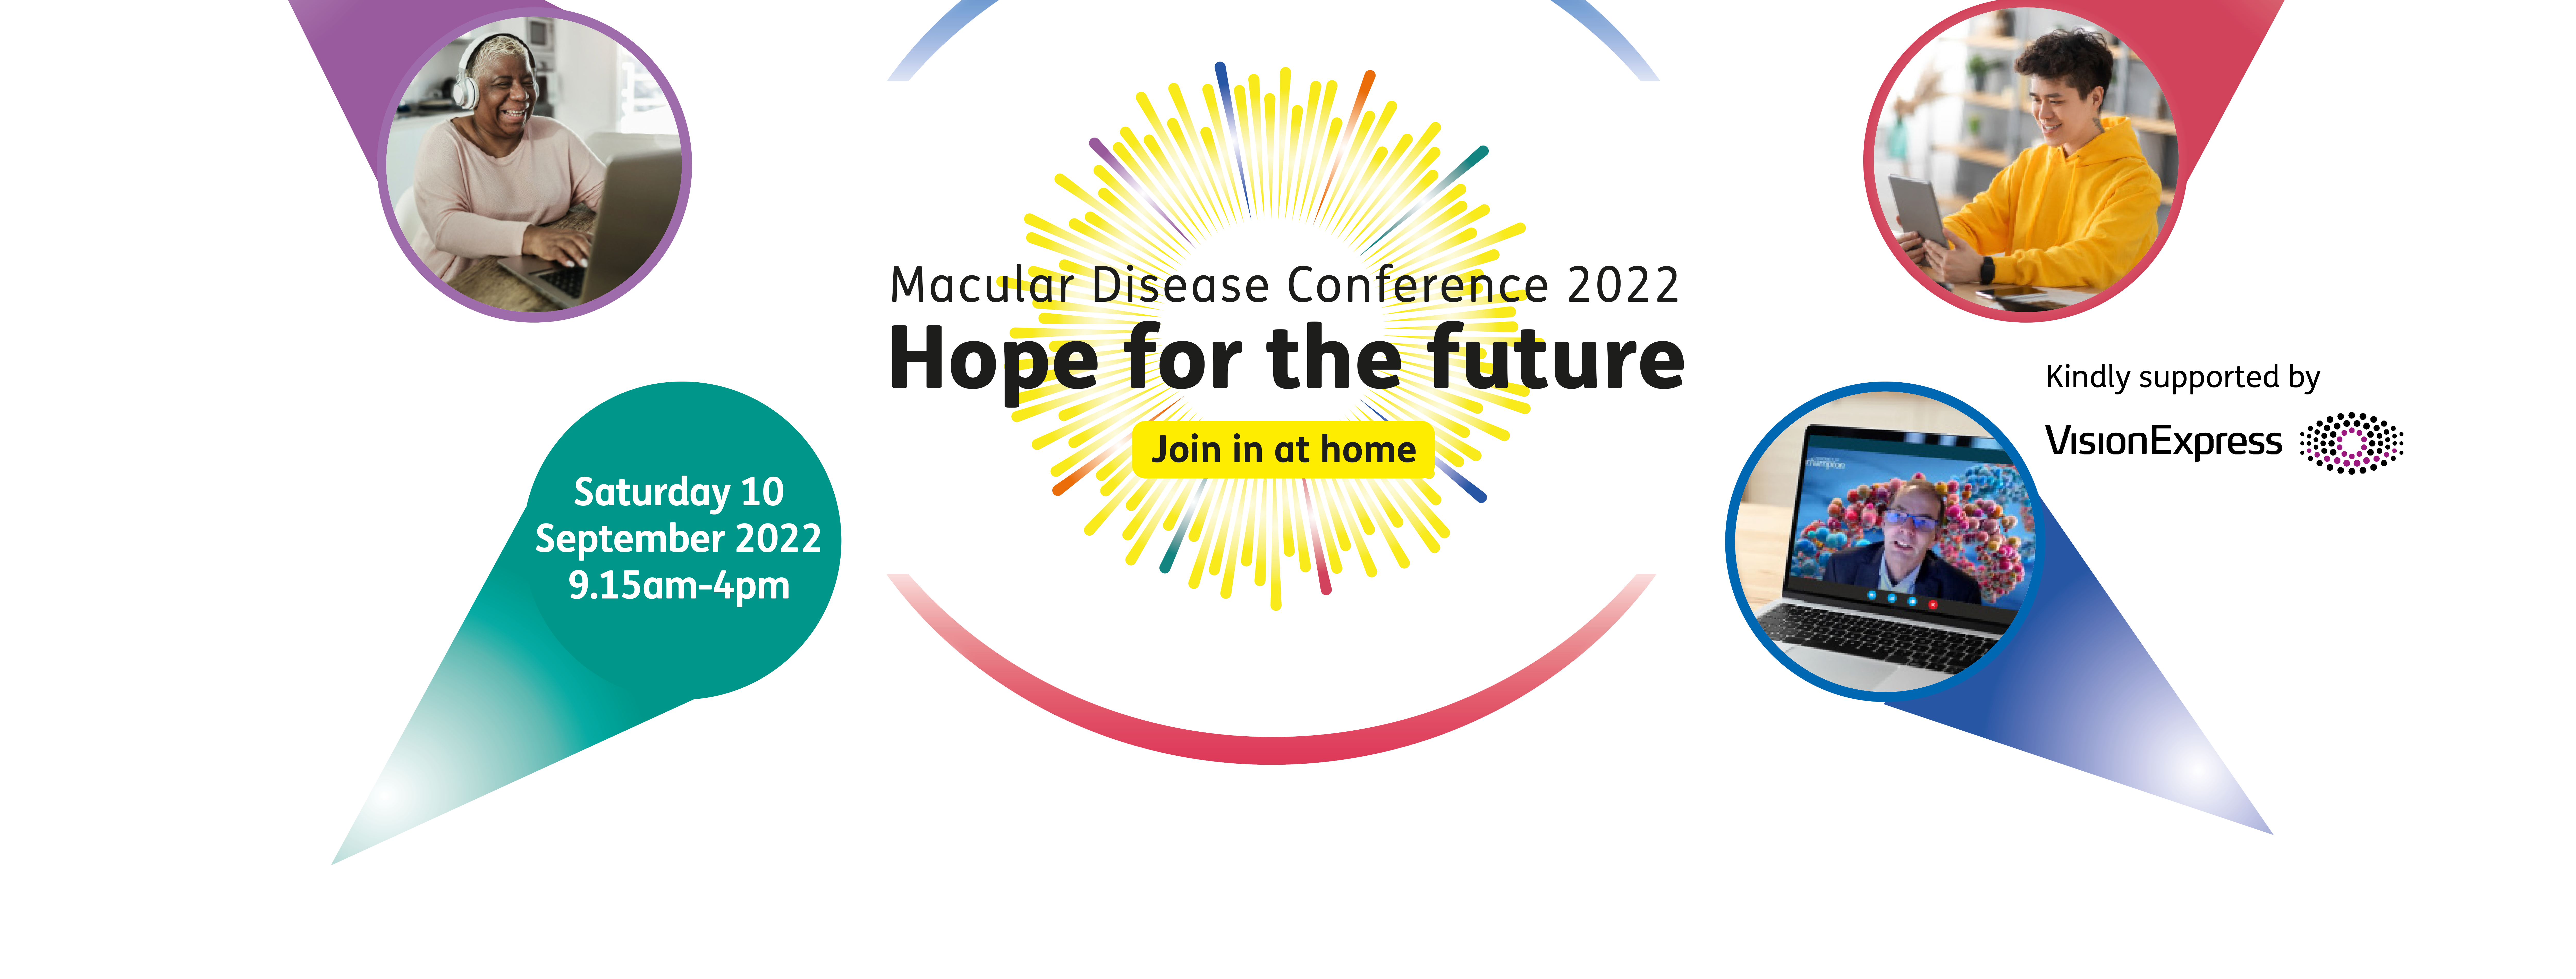 Macular Disease Conference 2022 Highlights primary image